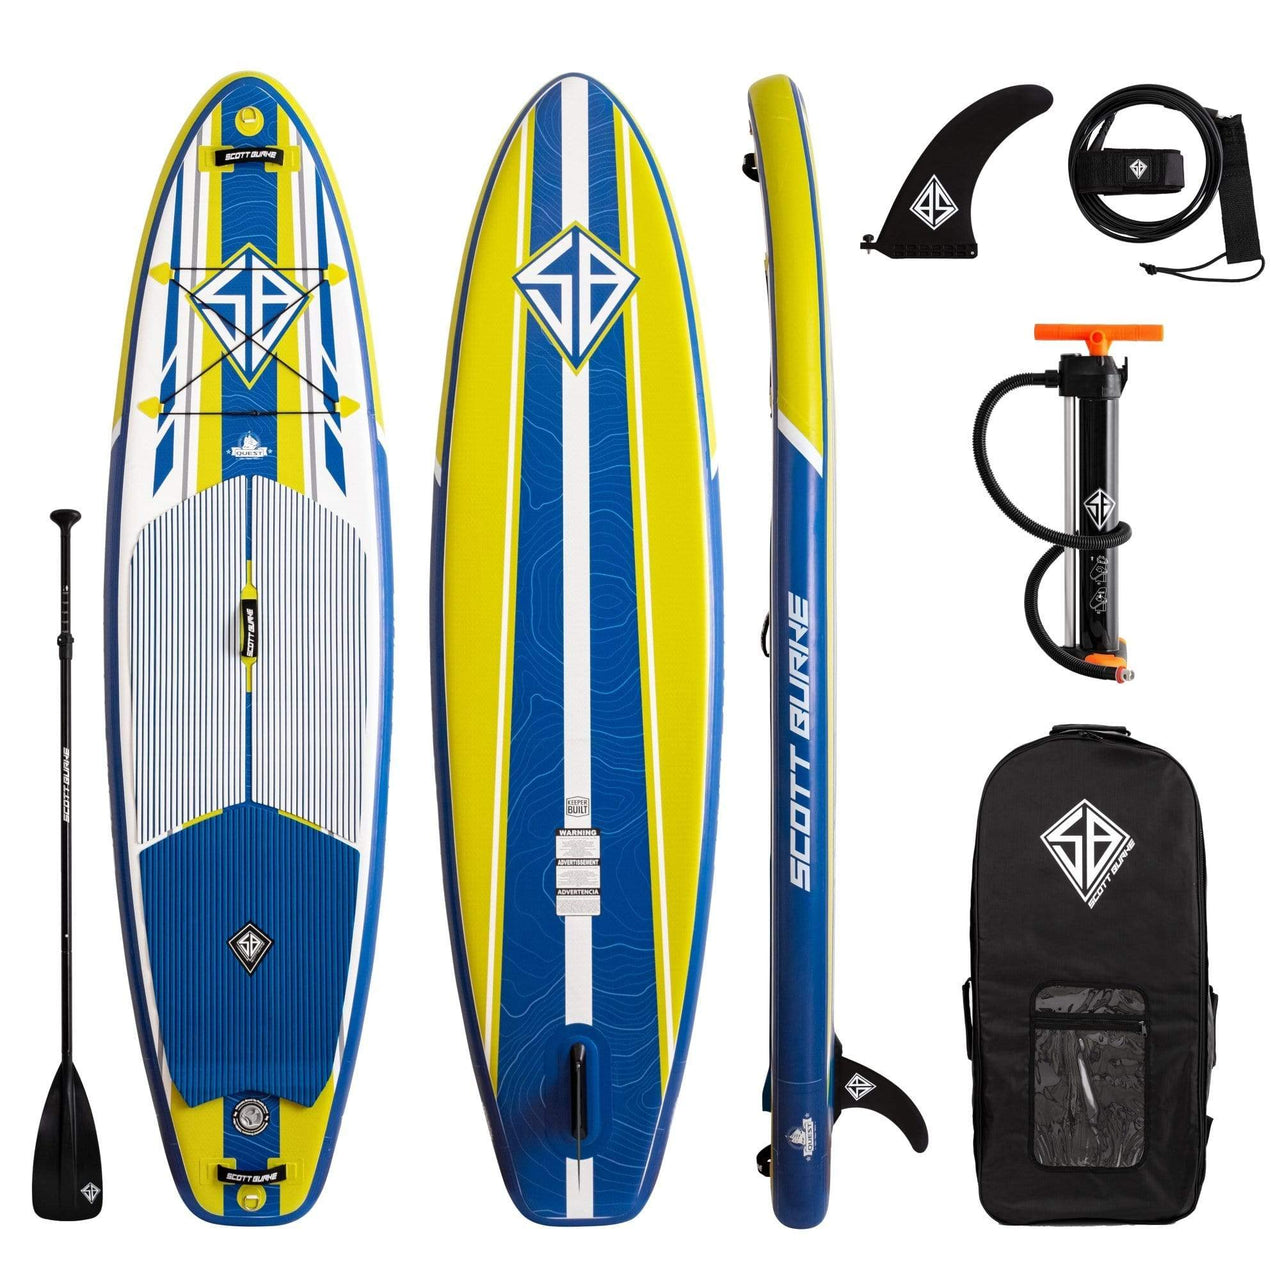 Scott Burke 10' Quest Inflatable SUP Paddleboard - Good Wave